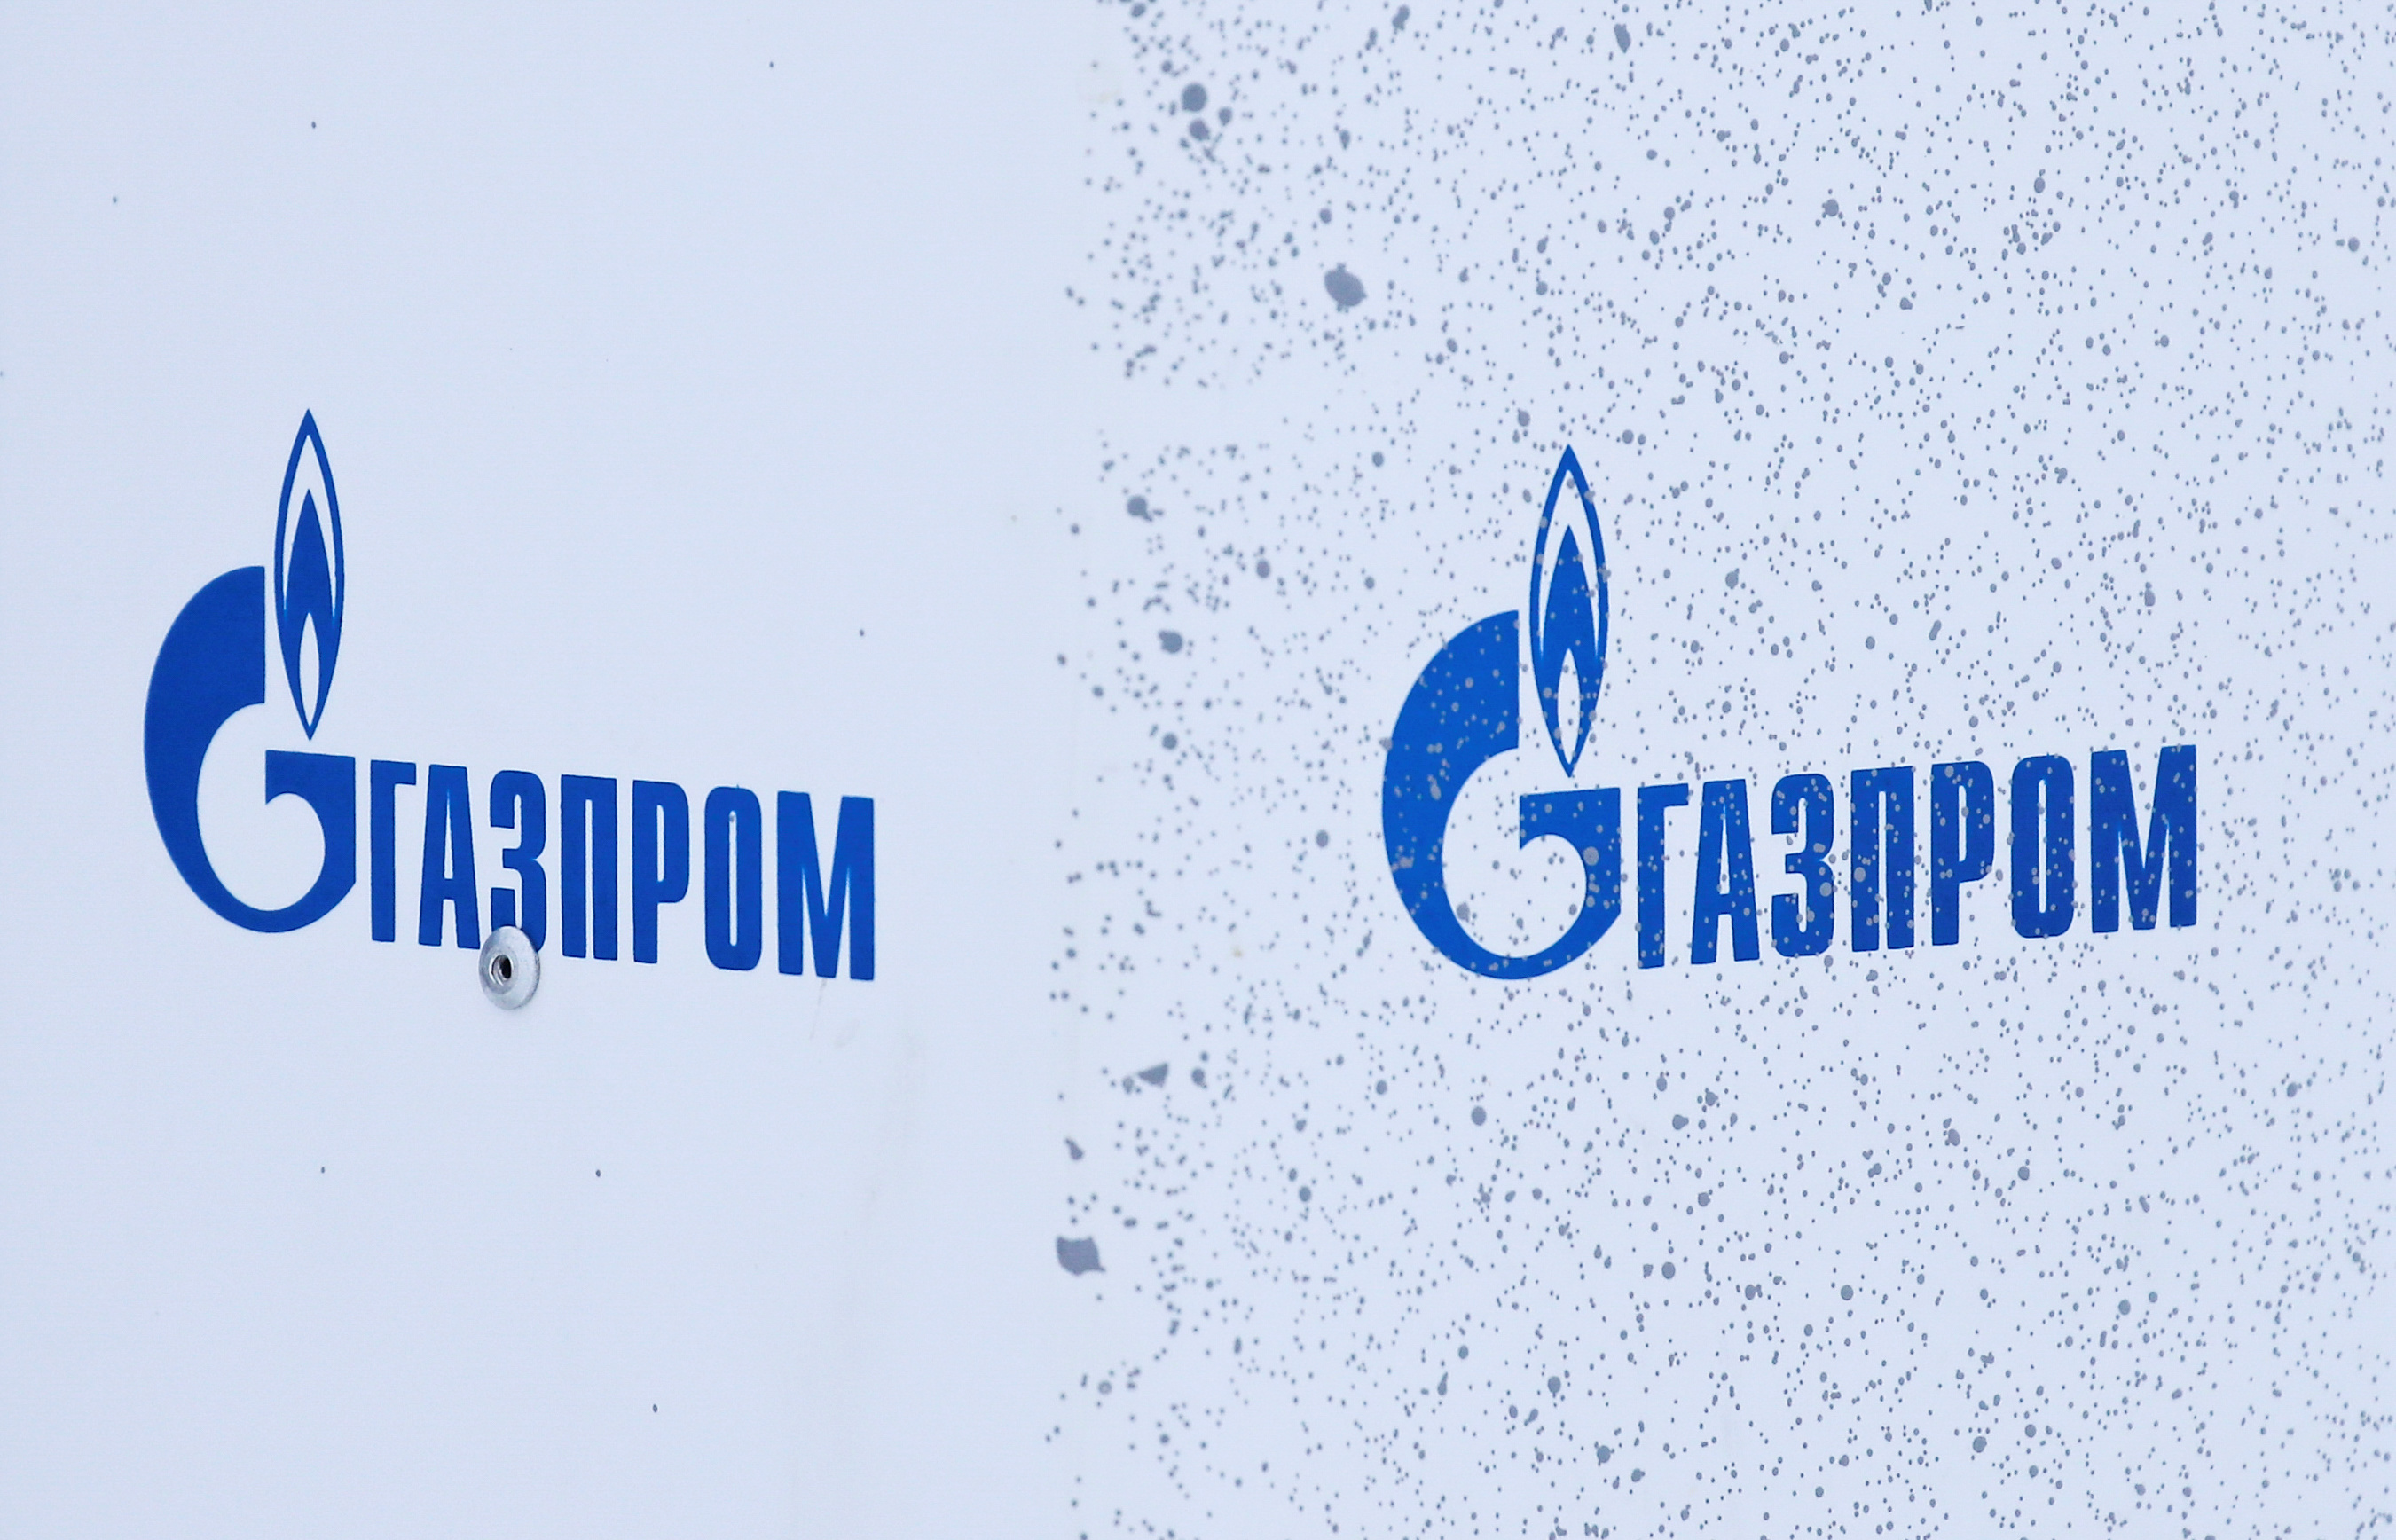 Gazprom logos are on display at Bovanenkovo gas field on the Arctic Yamal peninsula, Russia May 21, 2019. Picture taken May 21, 2019. REUTERS/Maxim Shemetov/Files